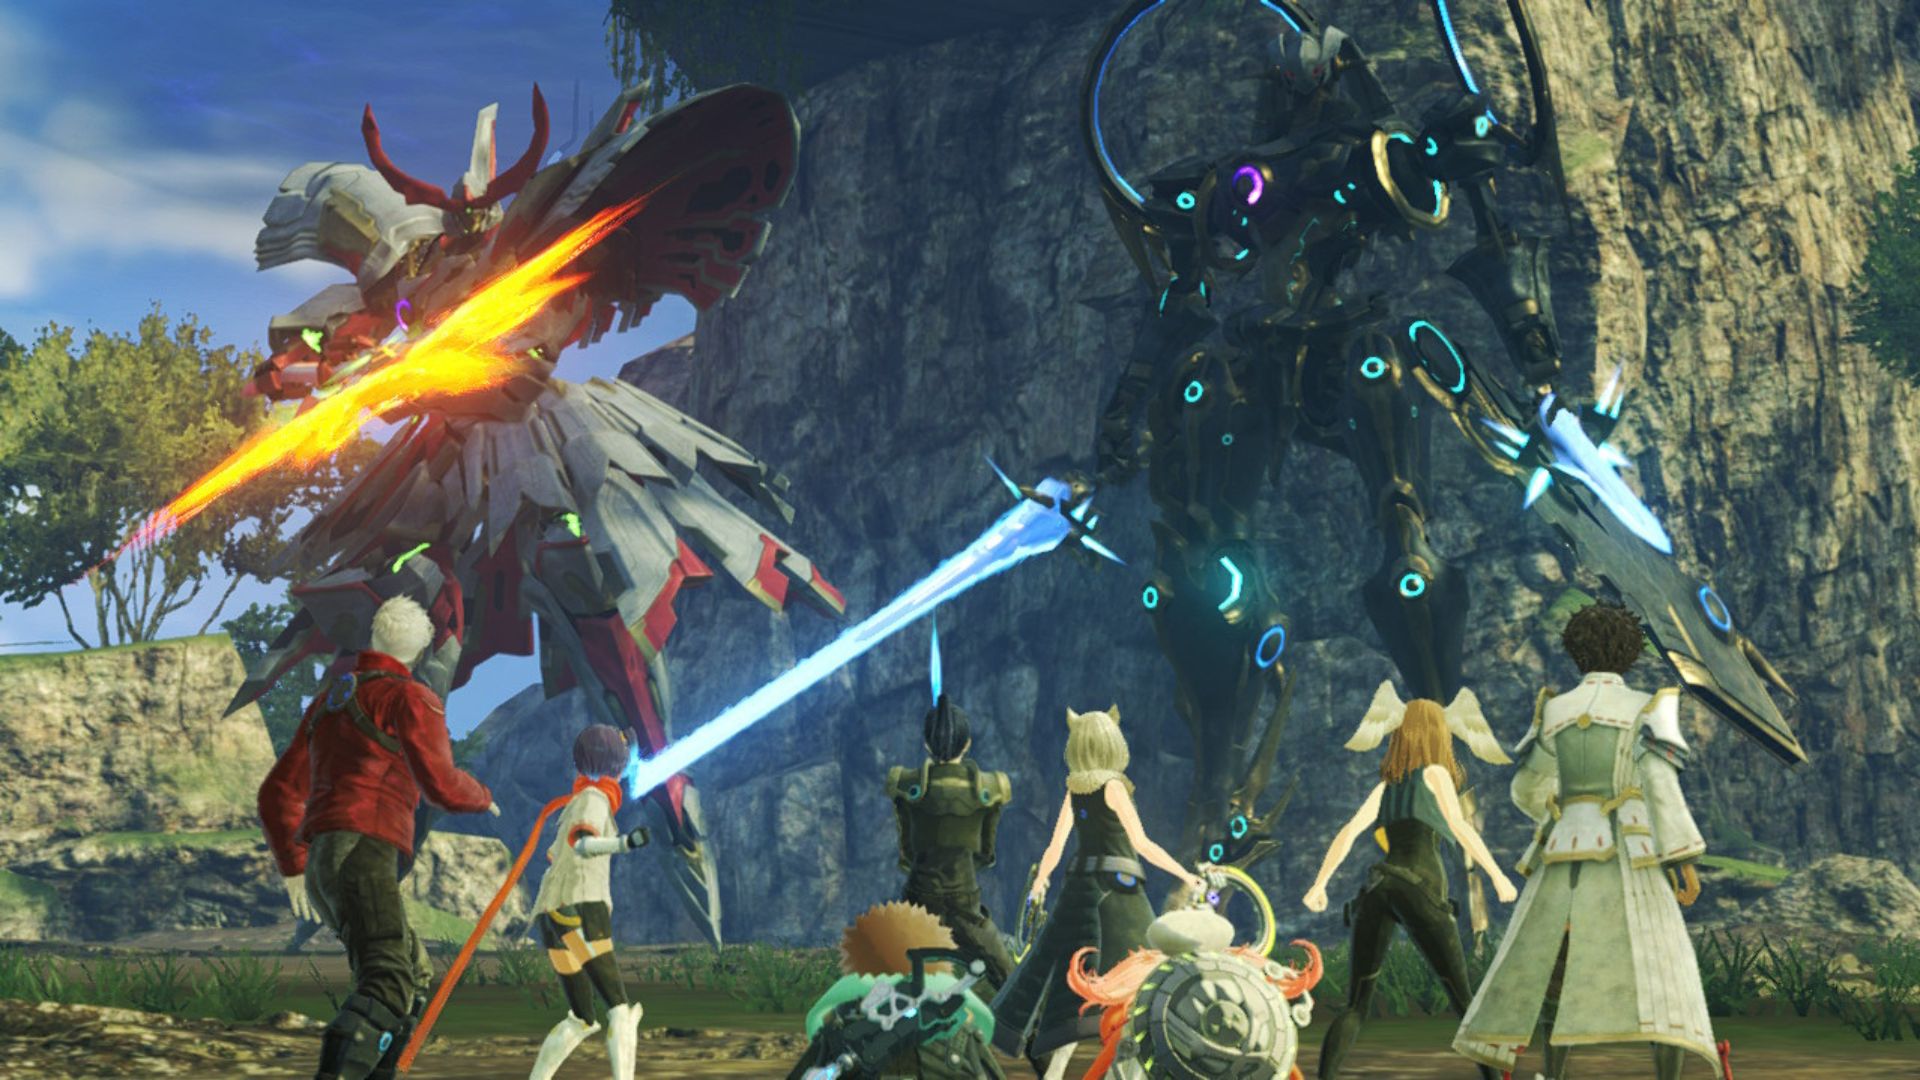 Xenoblade Chronicles 3, How Long To Beat & Game Length